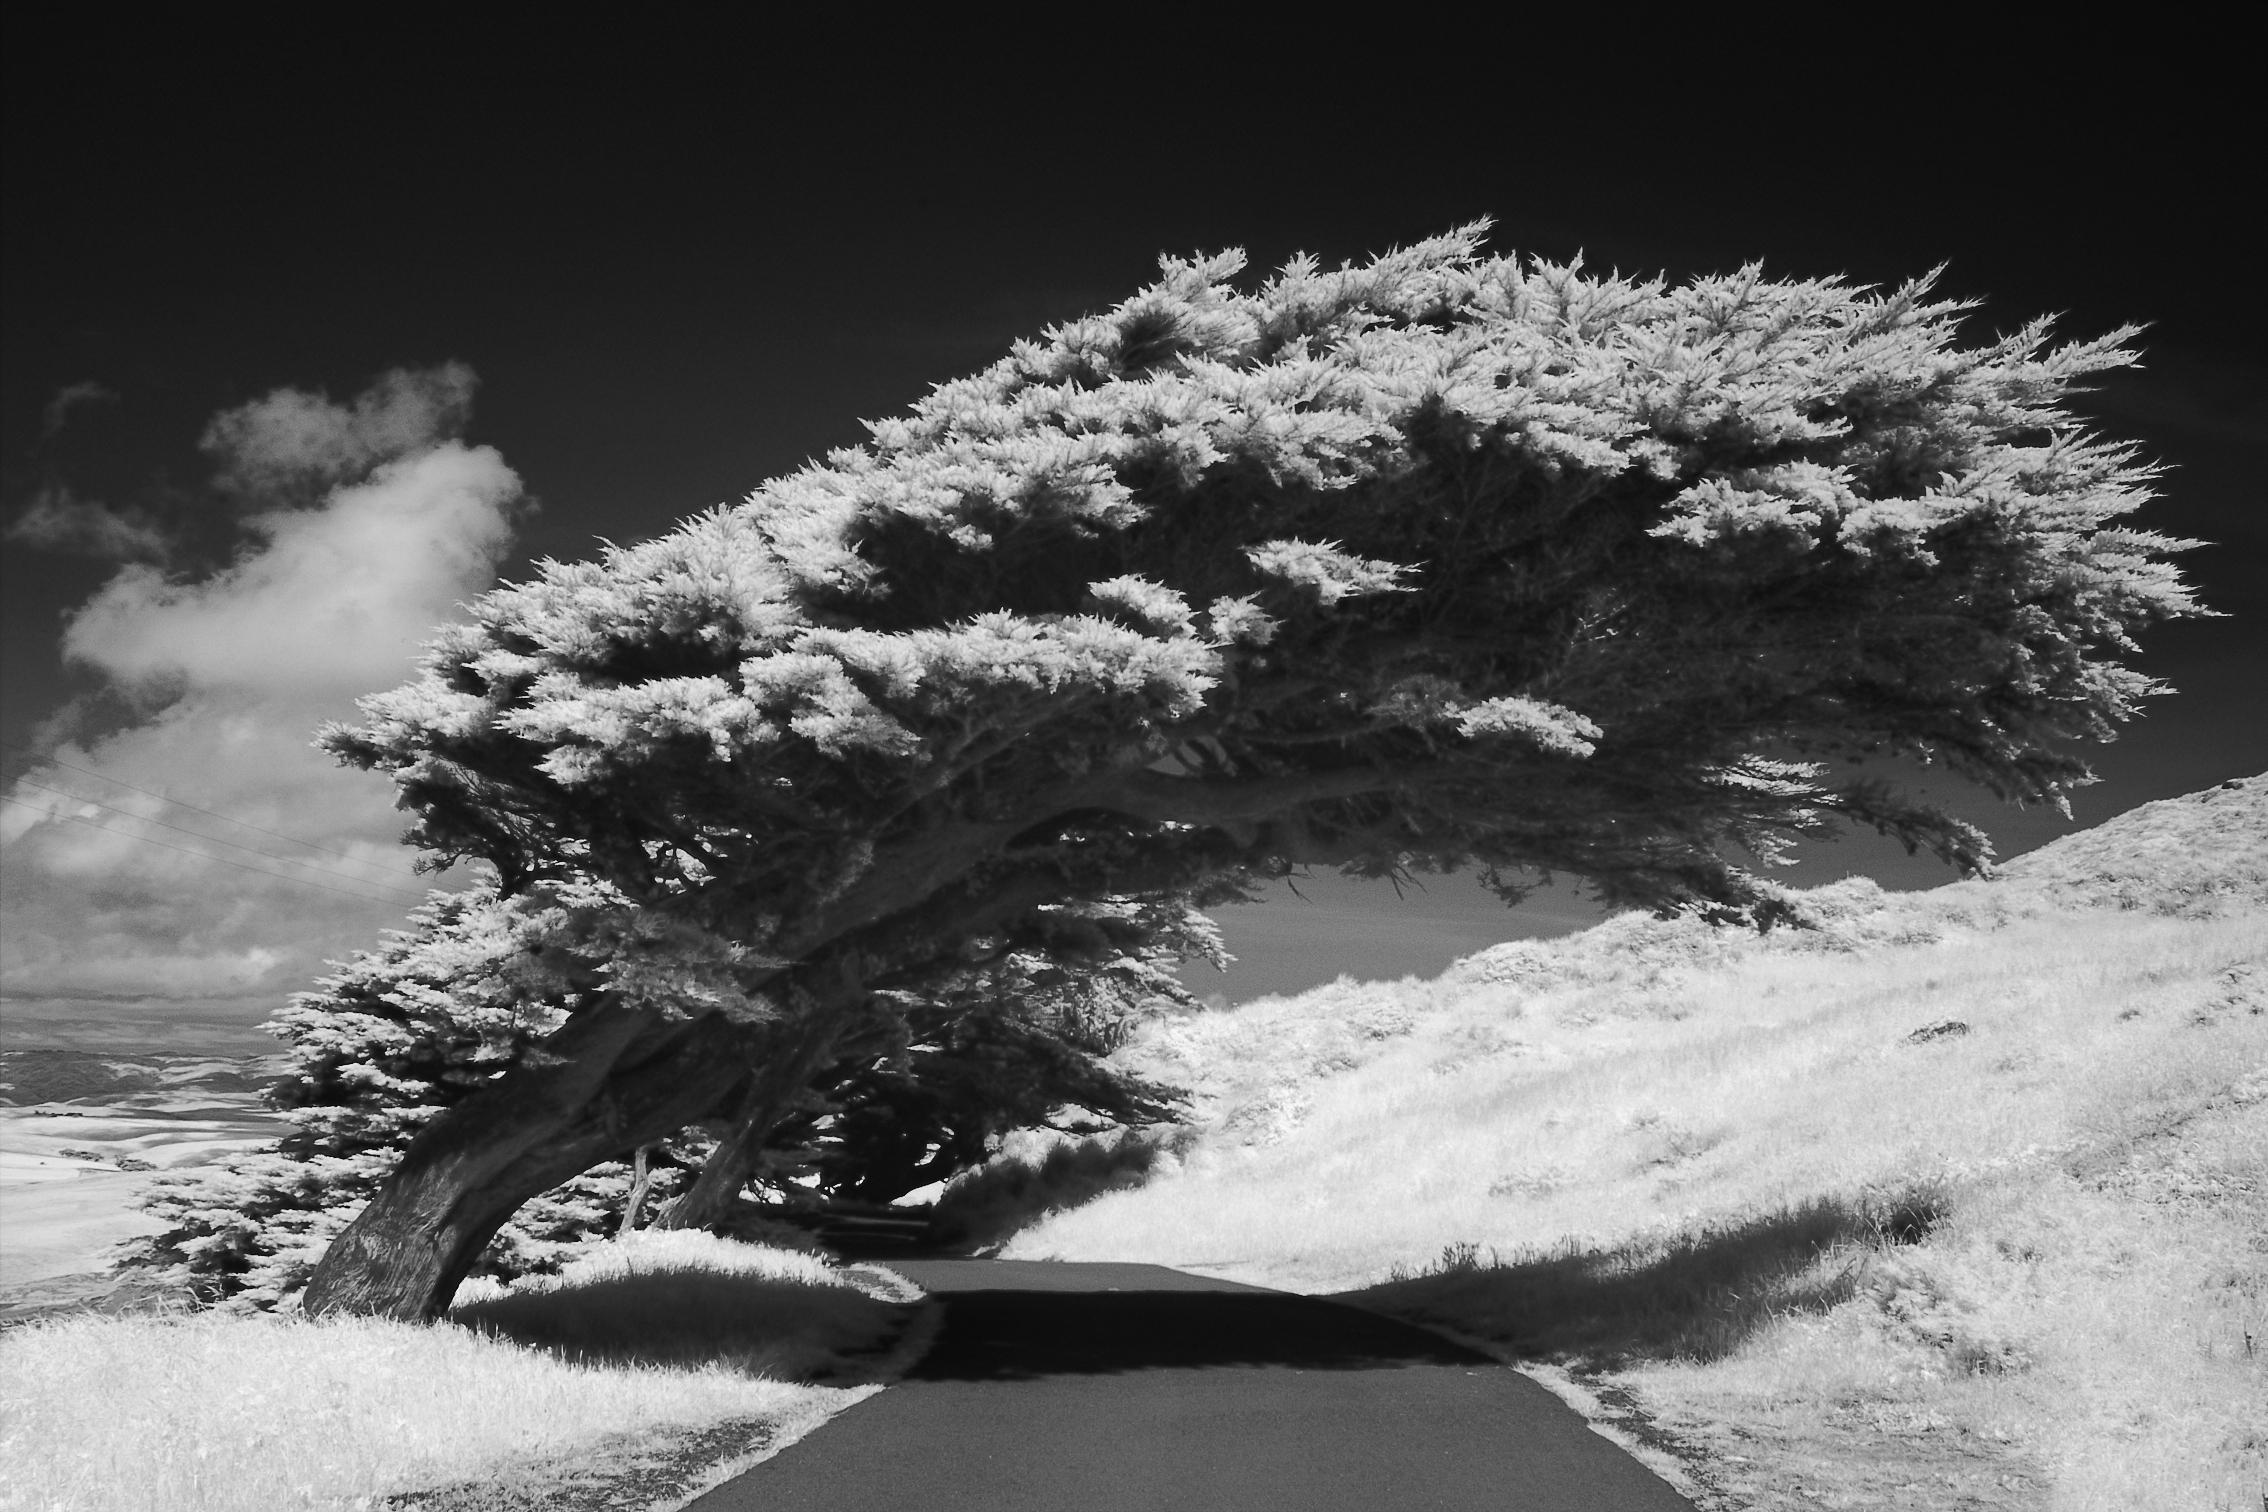 Infrared Photography - Large Bent Tree